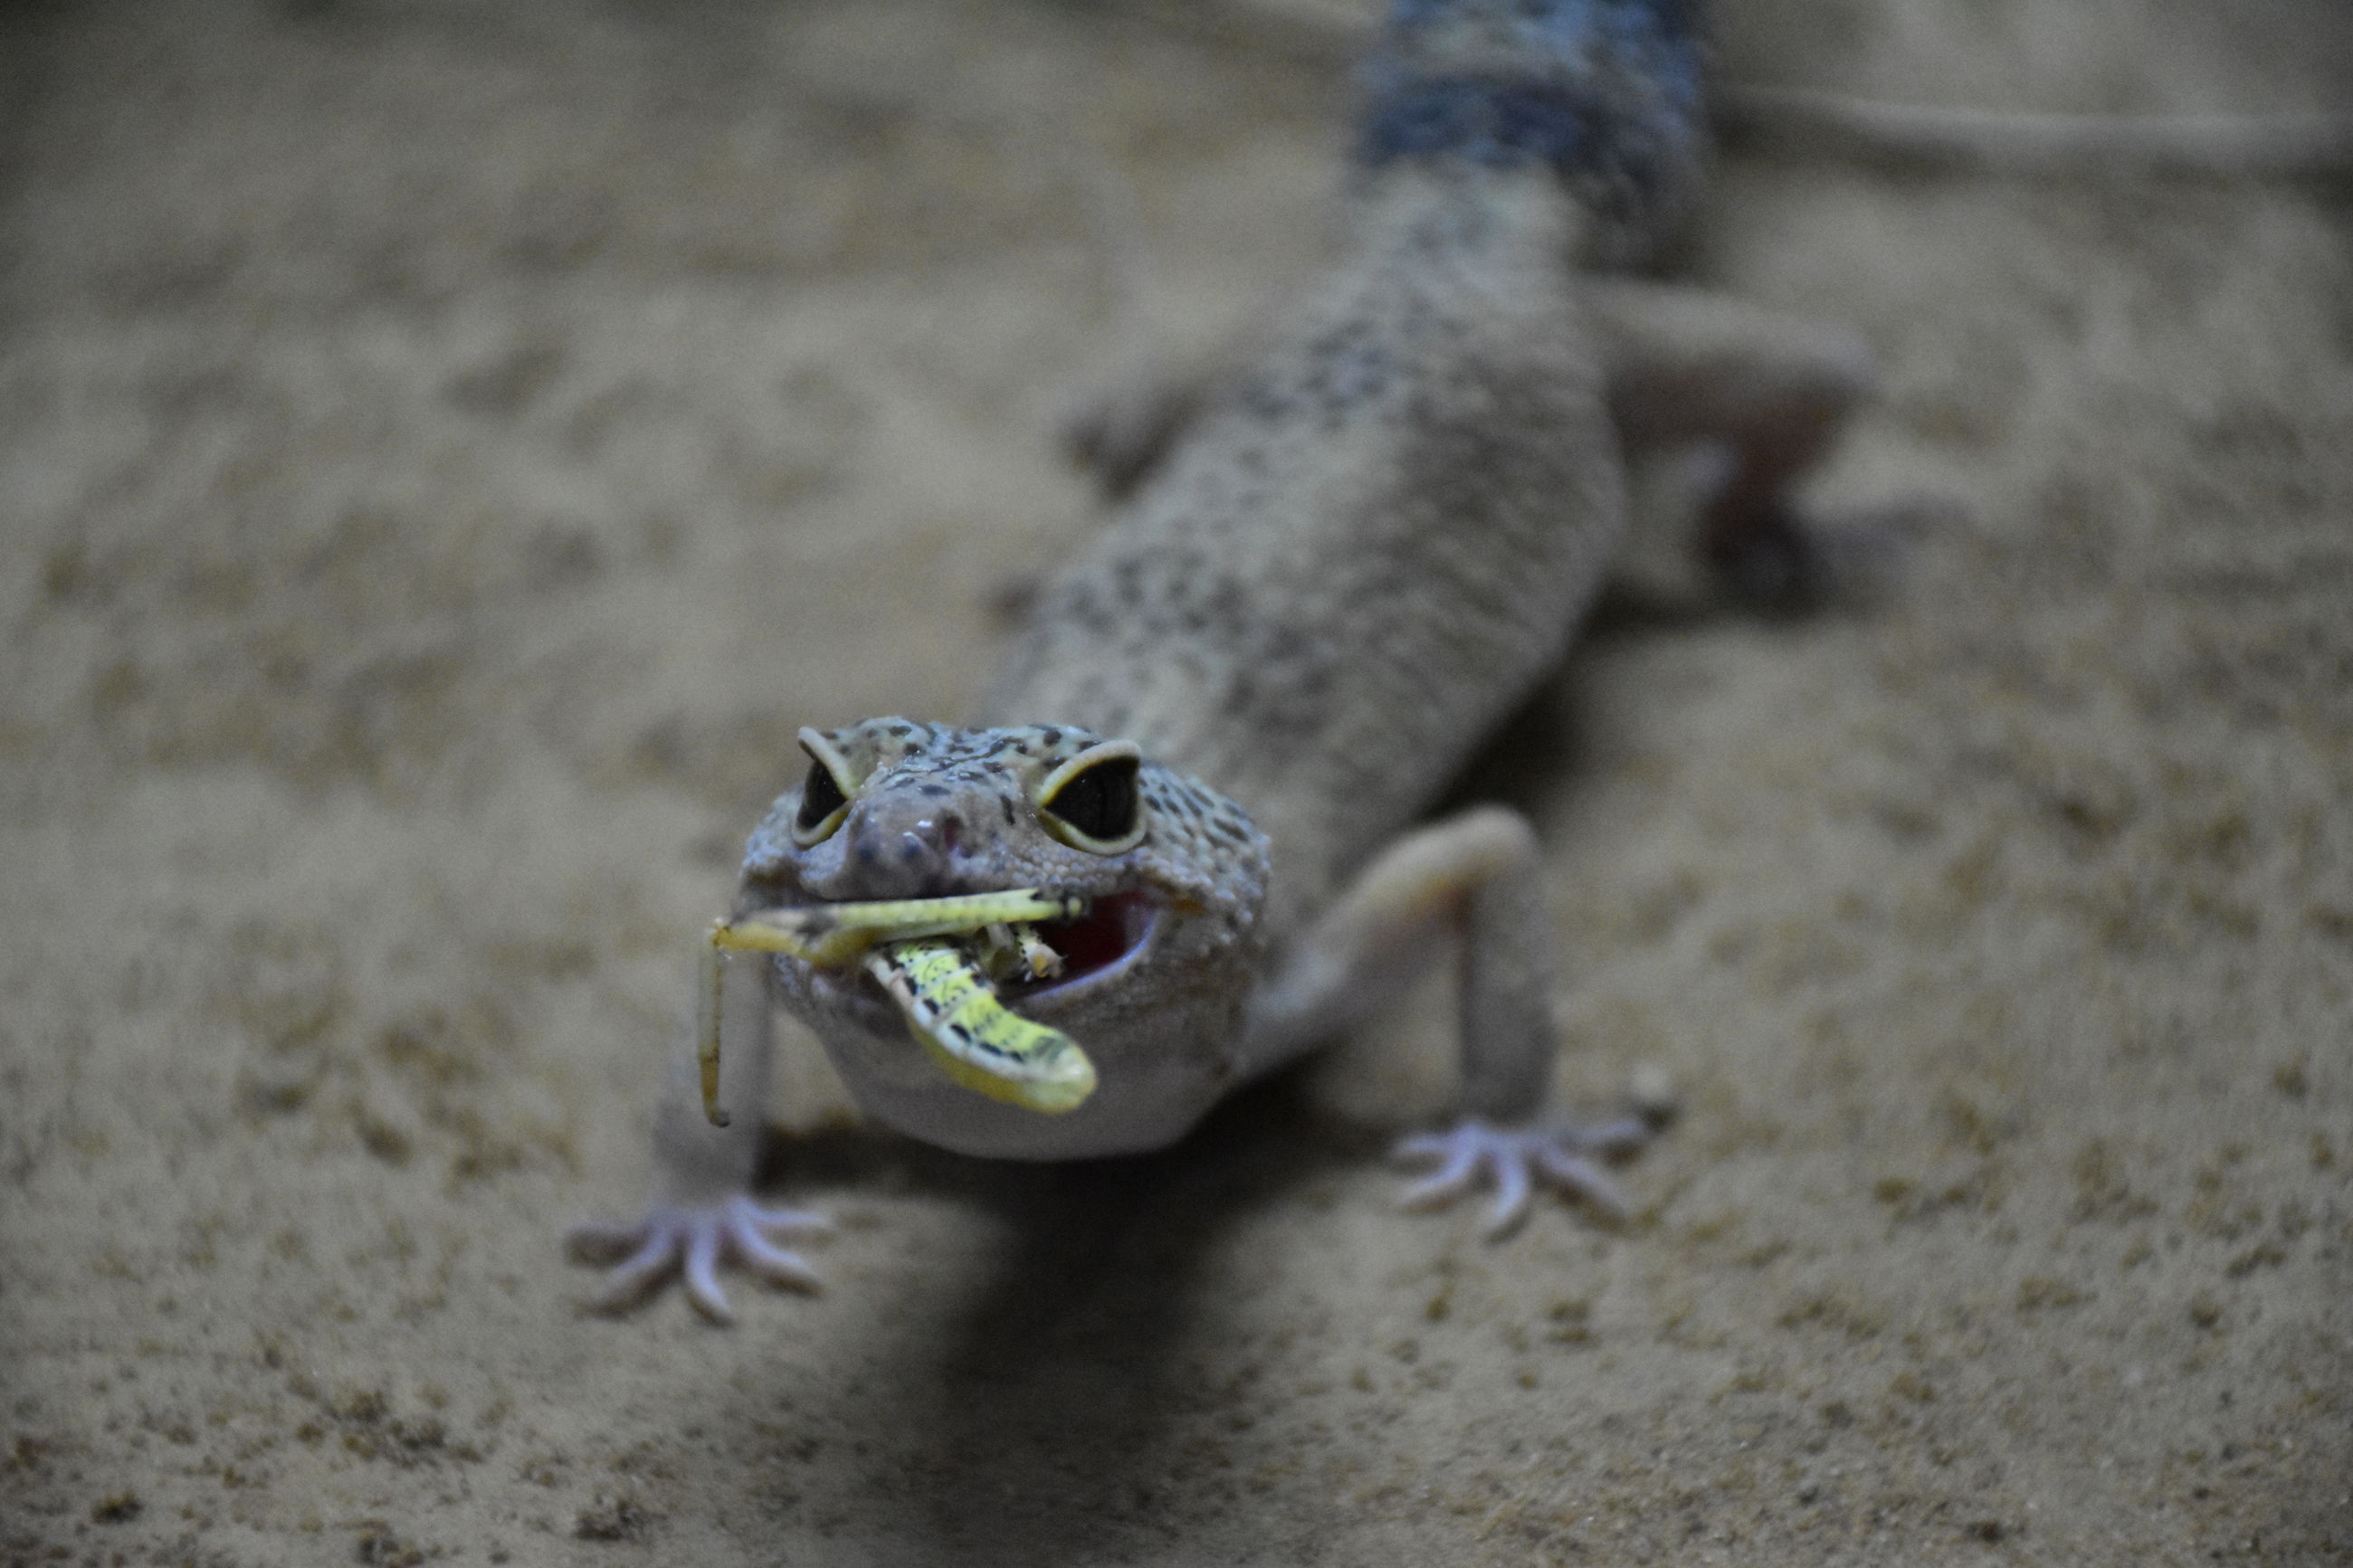 CLOSE-UP OF LIZARD ON SAND